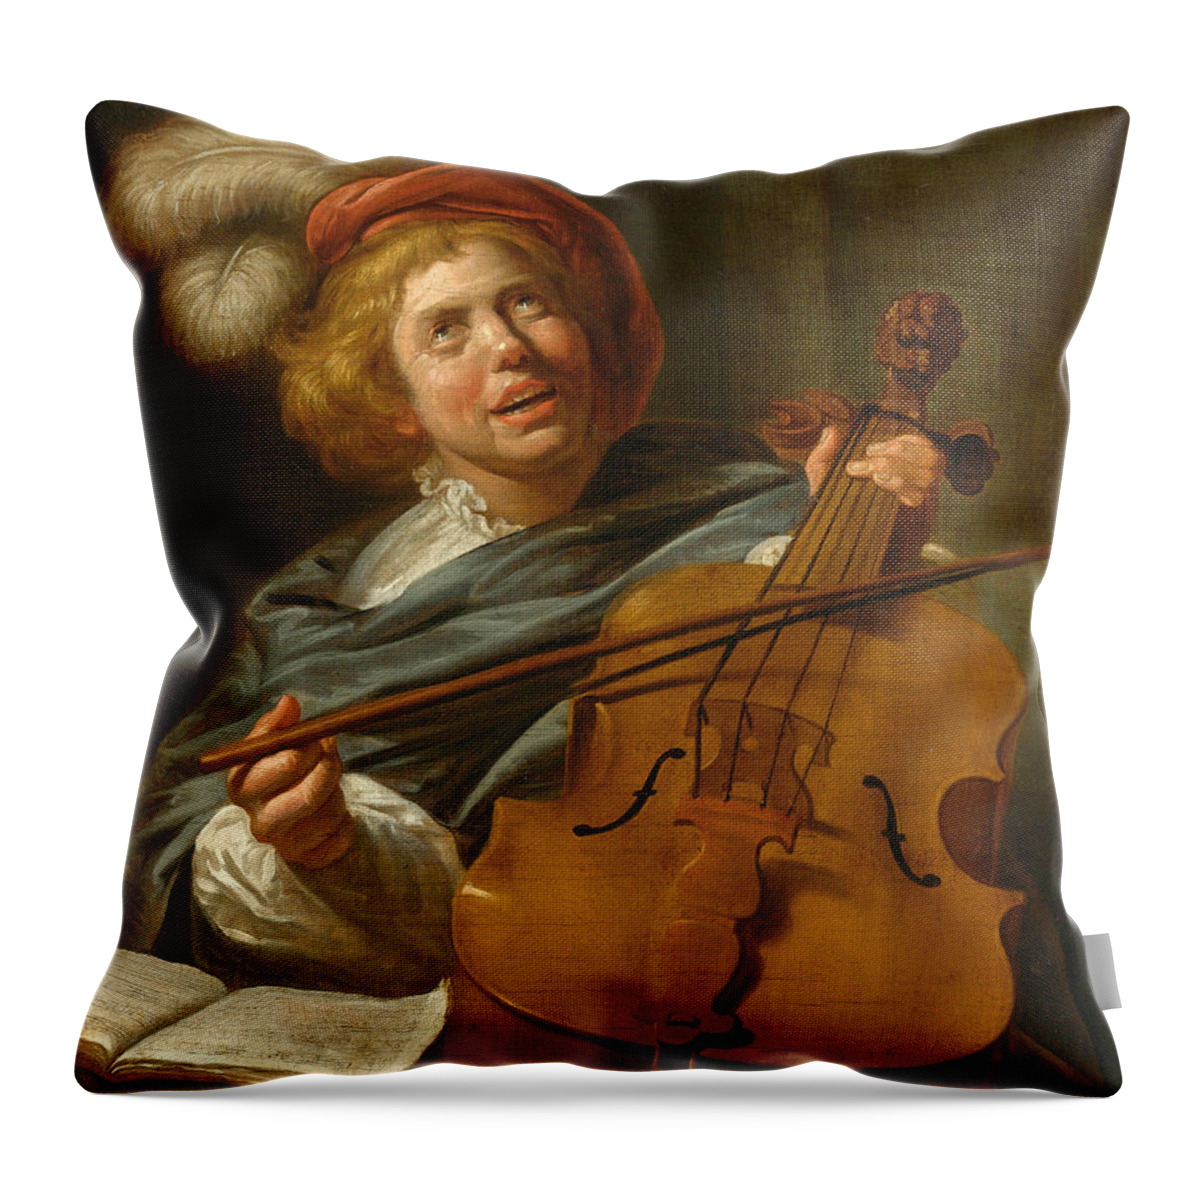 Judith Leyster And Studio Throw Pillow featuring the painting Cello Player by Judith Leyster and Studio